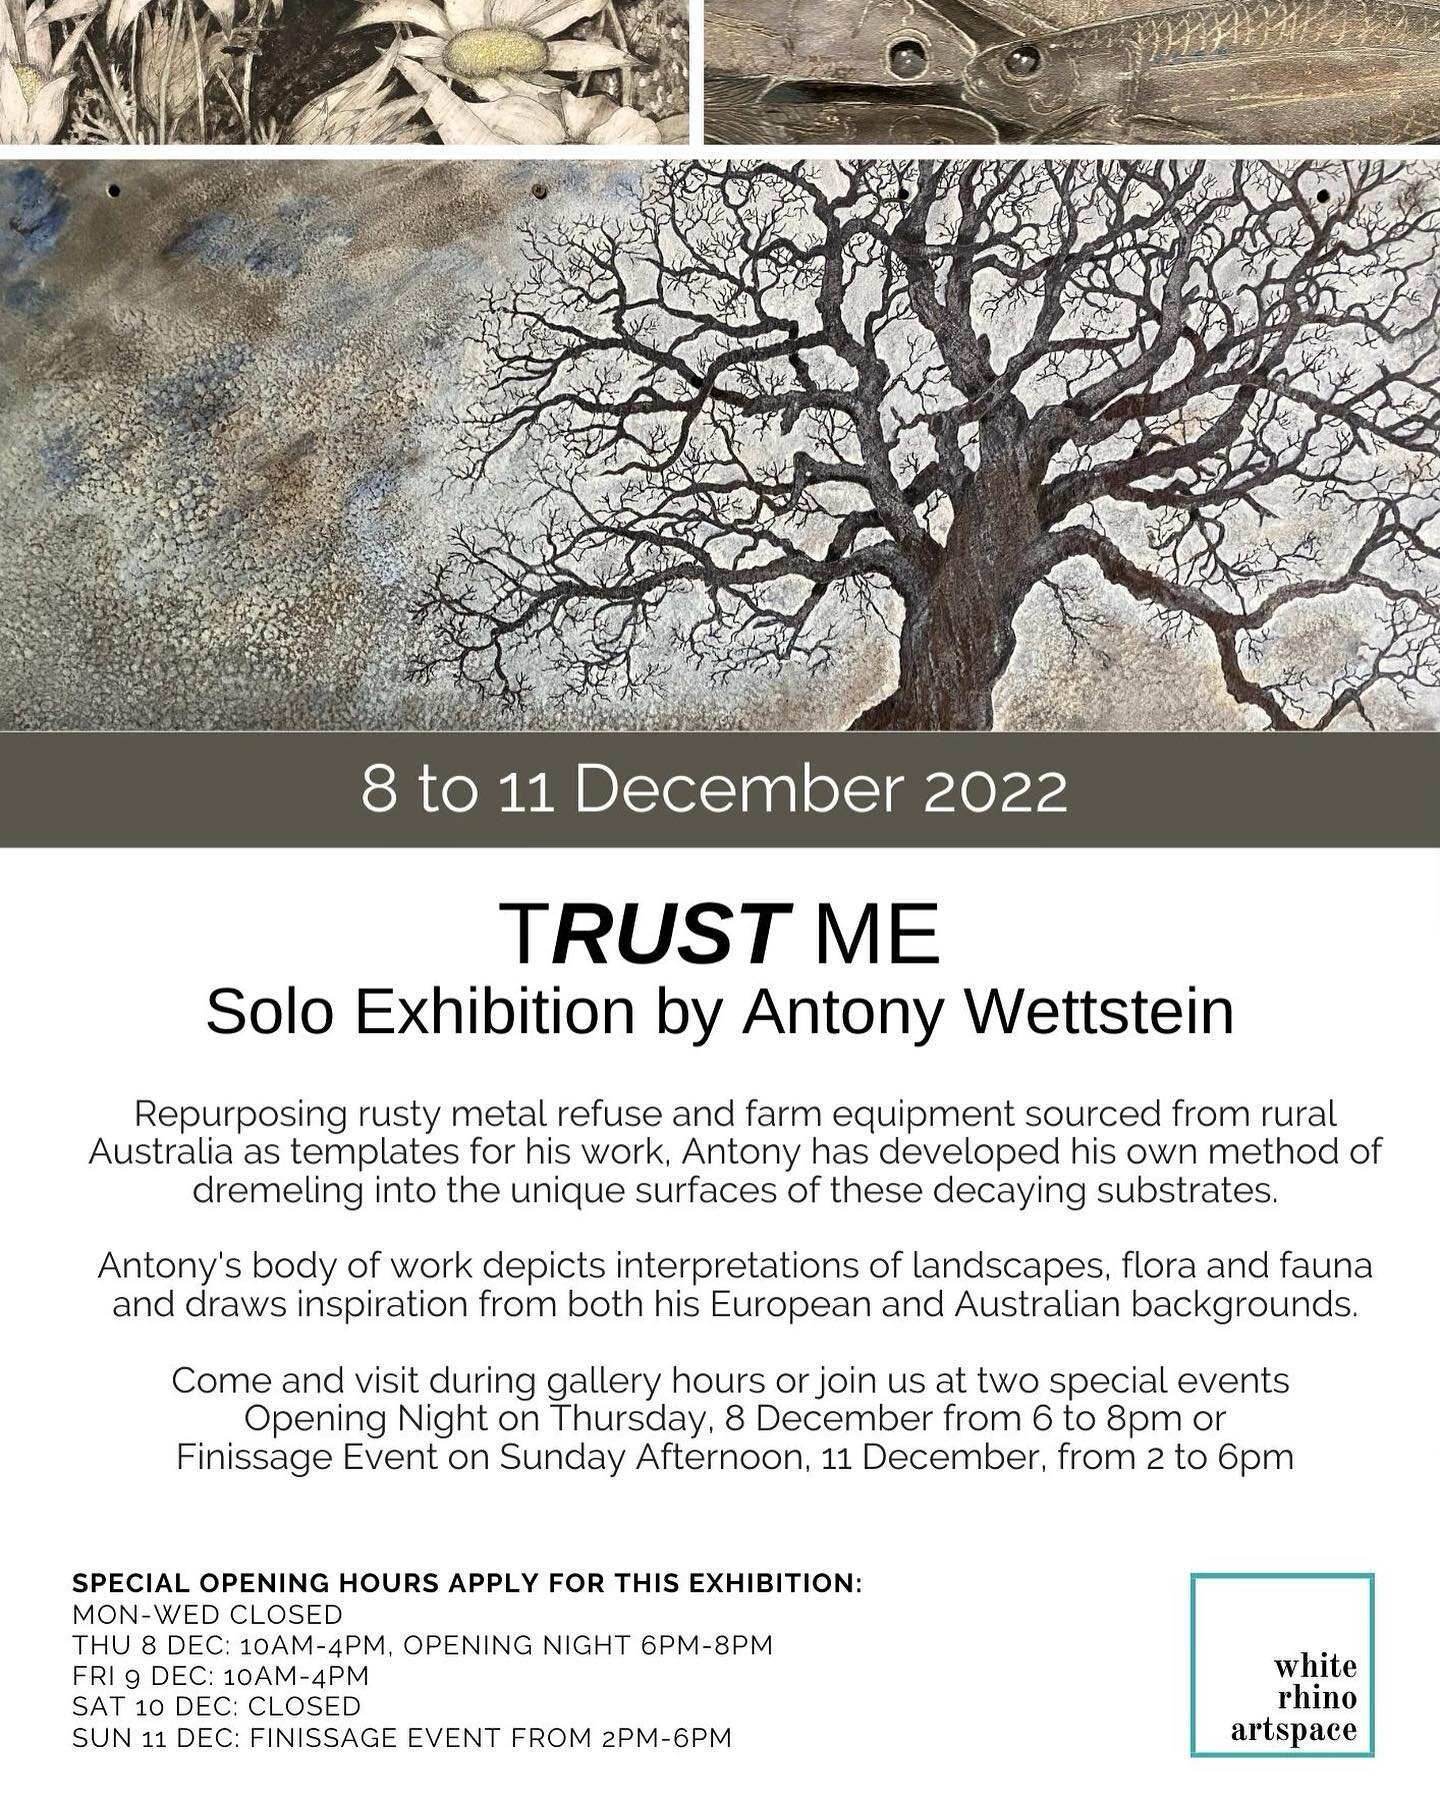 Opening Thursday 8 December, White Rhino Artspace is excited to present TRUST ME a Solo Exhibition by Antony Wettstein. With a focus on the associated events the exhibition runs for one week only from Thursday to Sunday 8 to 11 December (Sat closed).